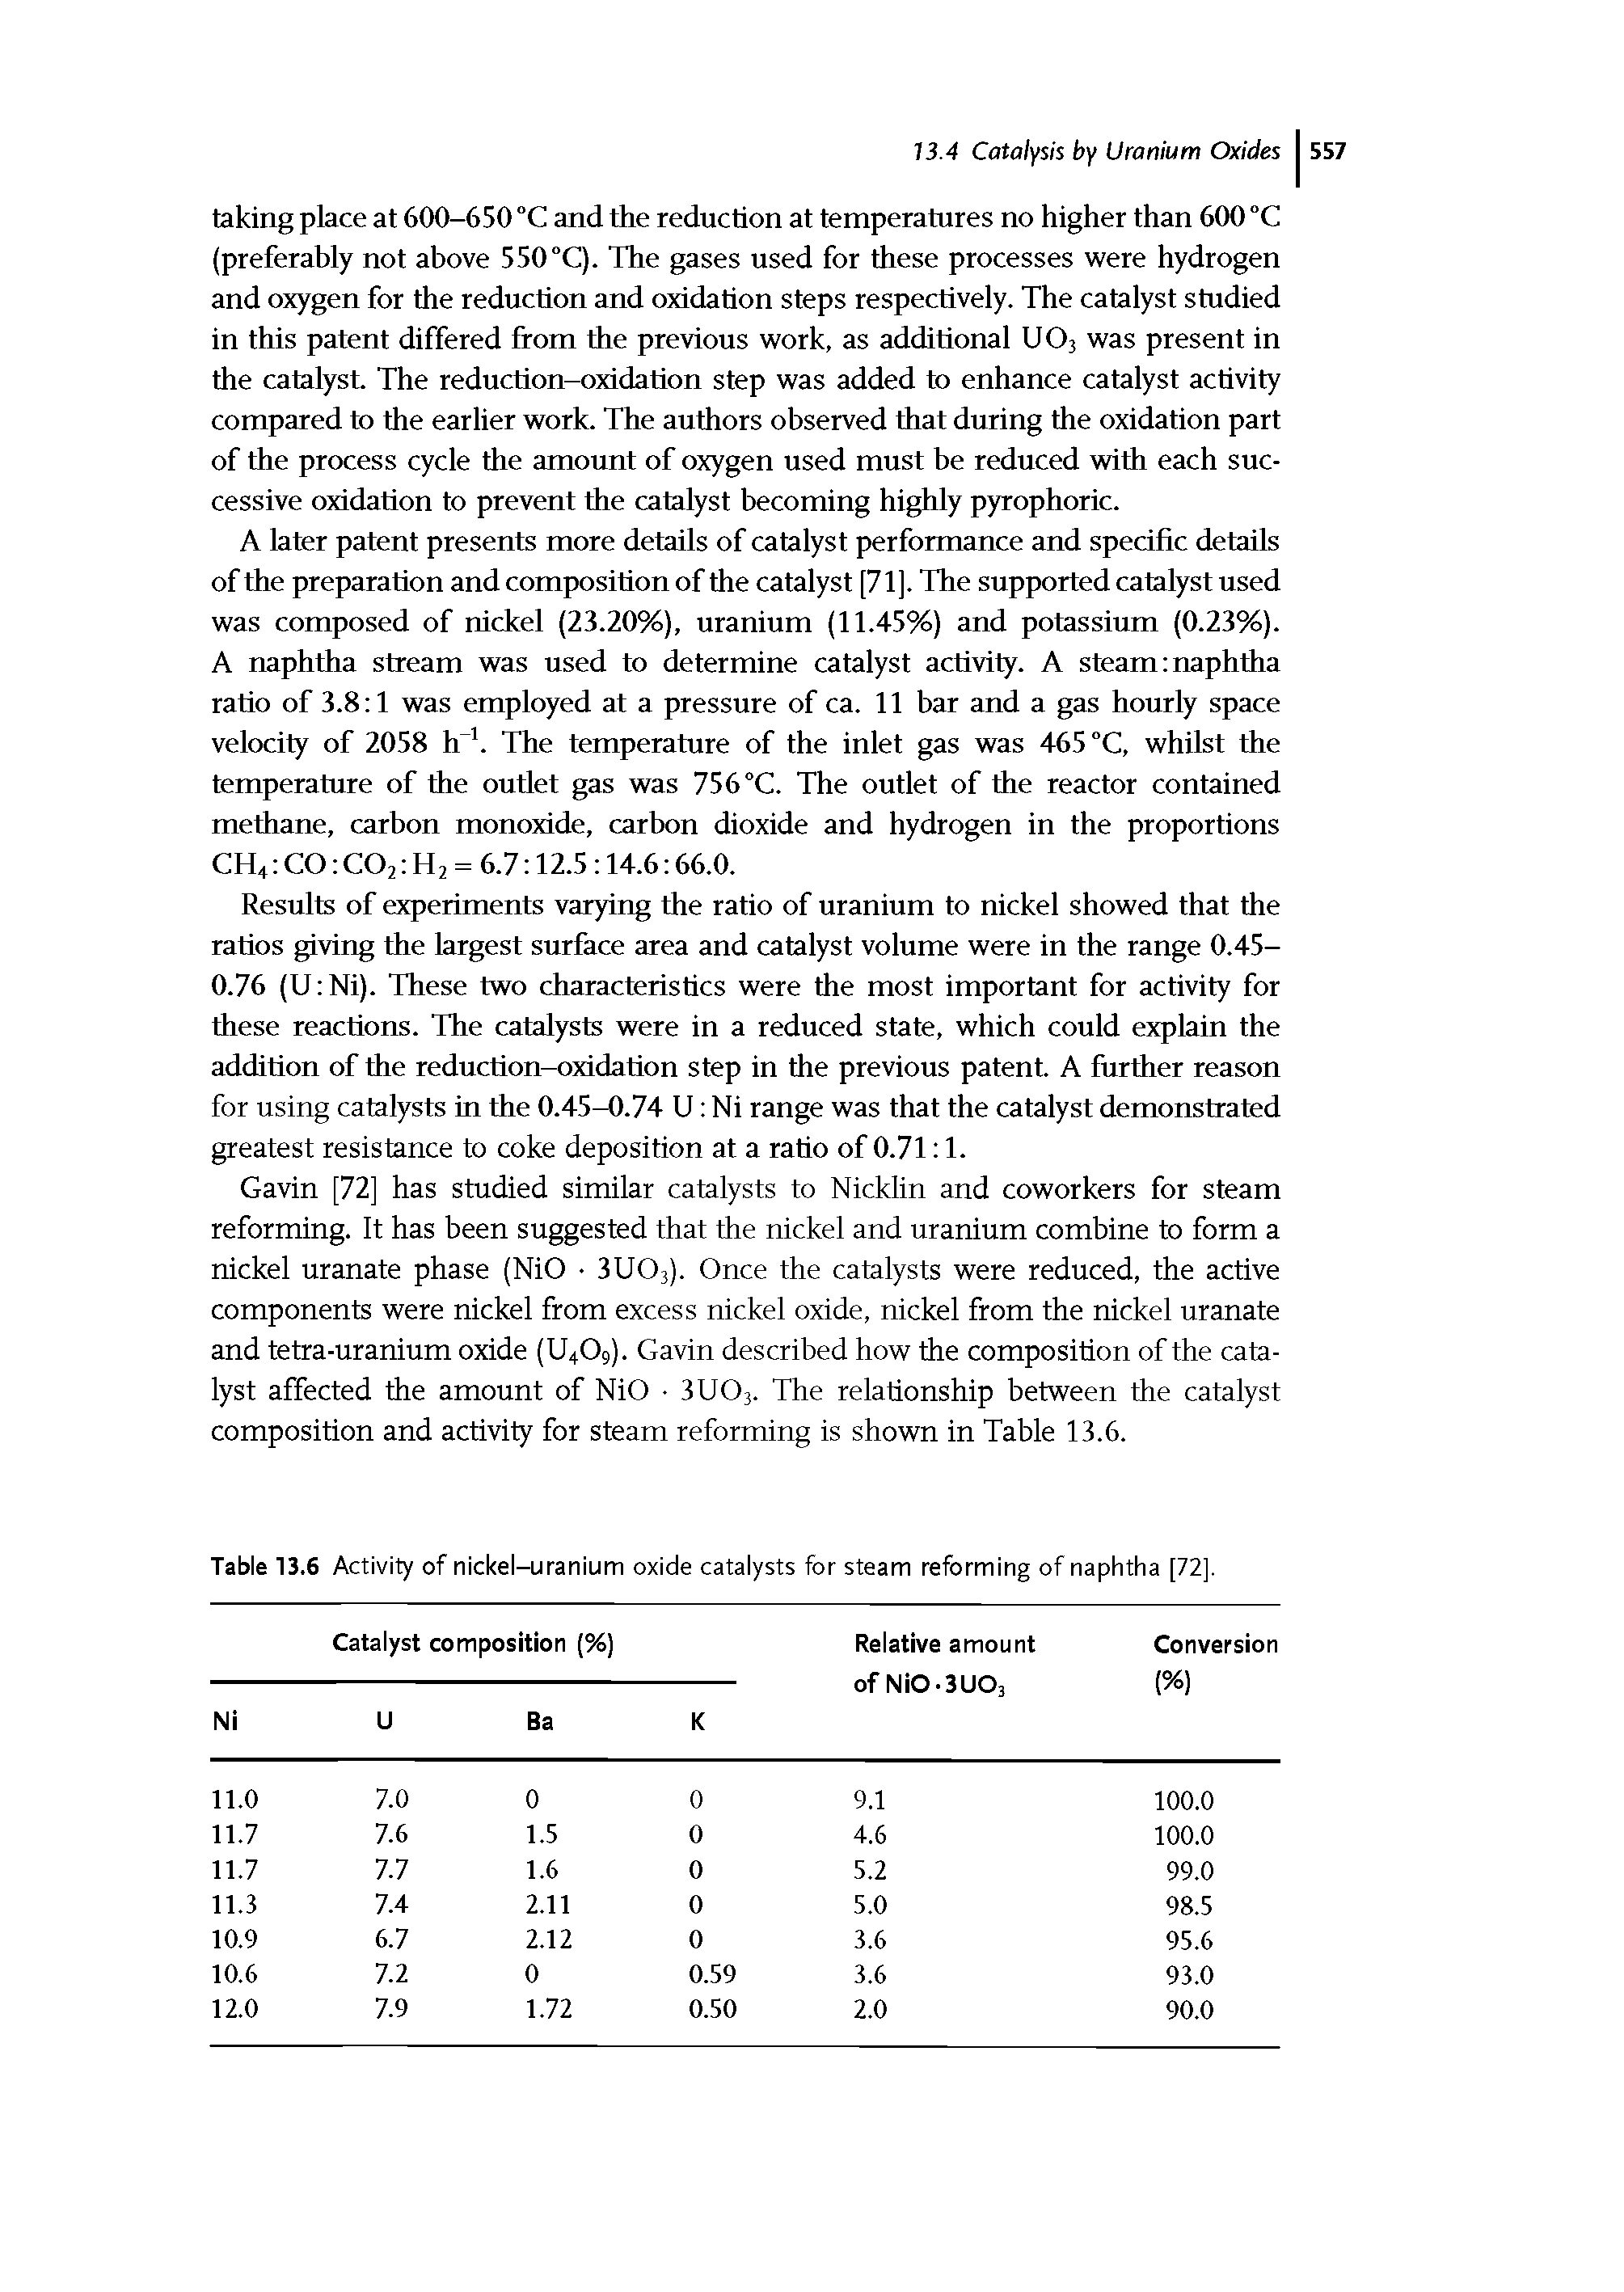 Table 13.6 Activity of nickel-uranium oxide catalysts for steam reforming of naphtha [72],...